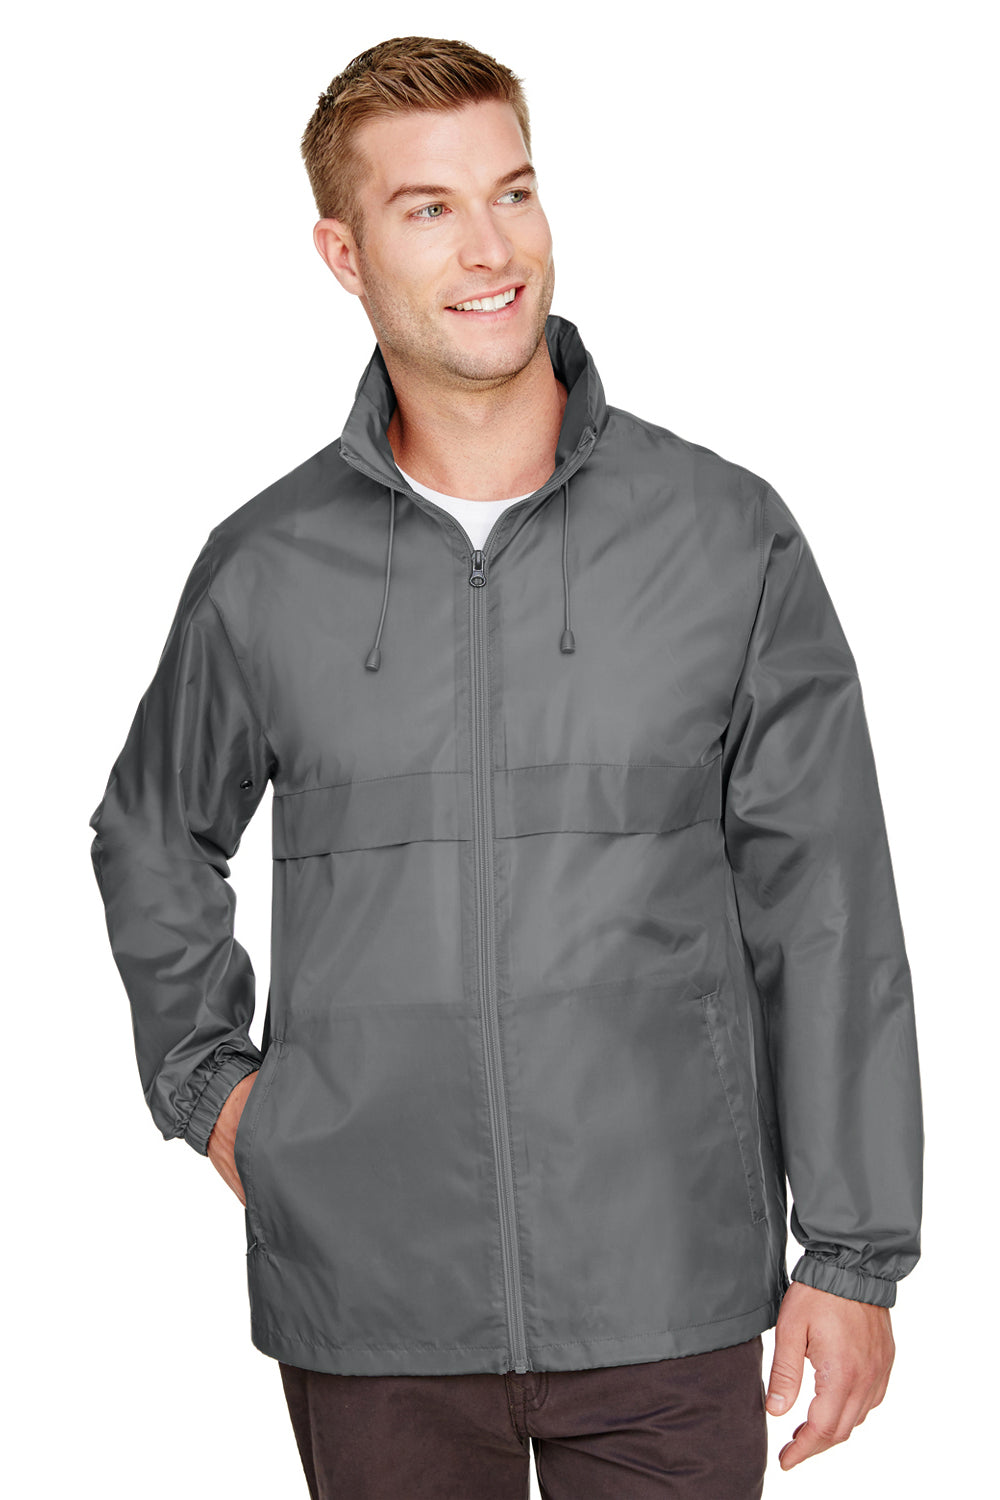 Team 365 TT73 Mens Zone Protect Water Resistant Full Zip Hooded Jacket Graphite Grey Front